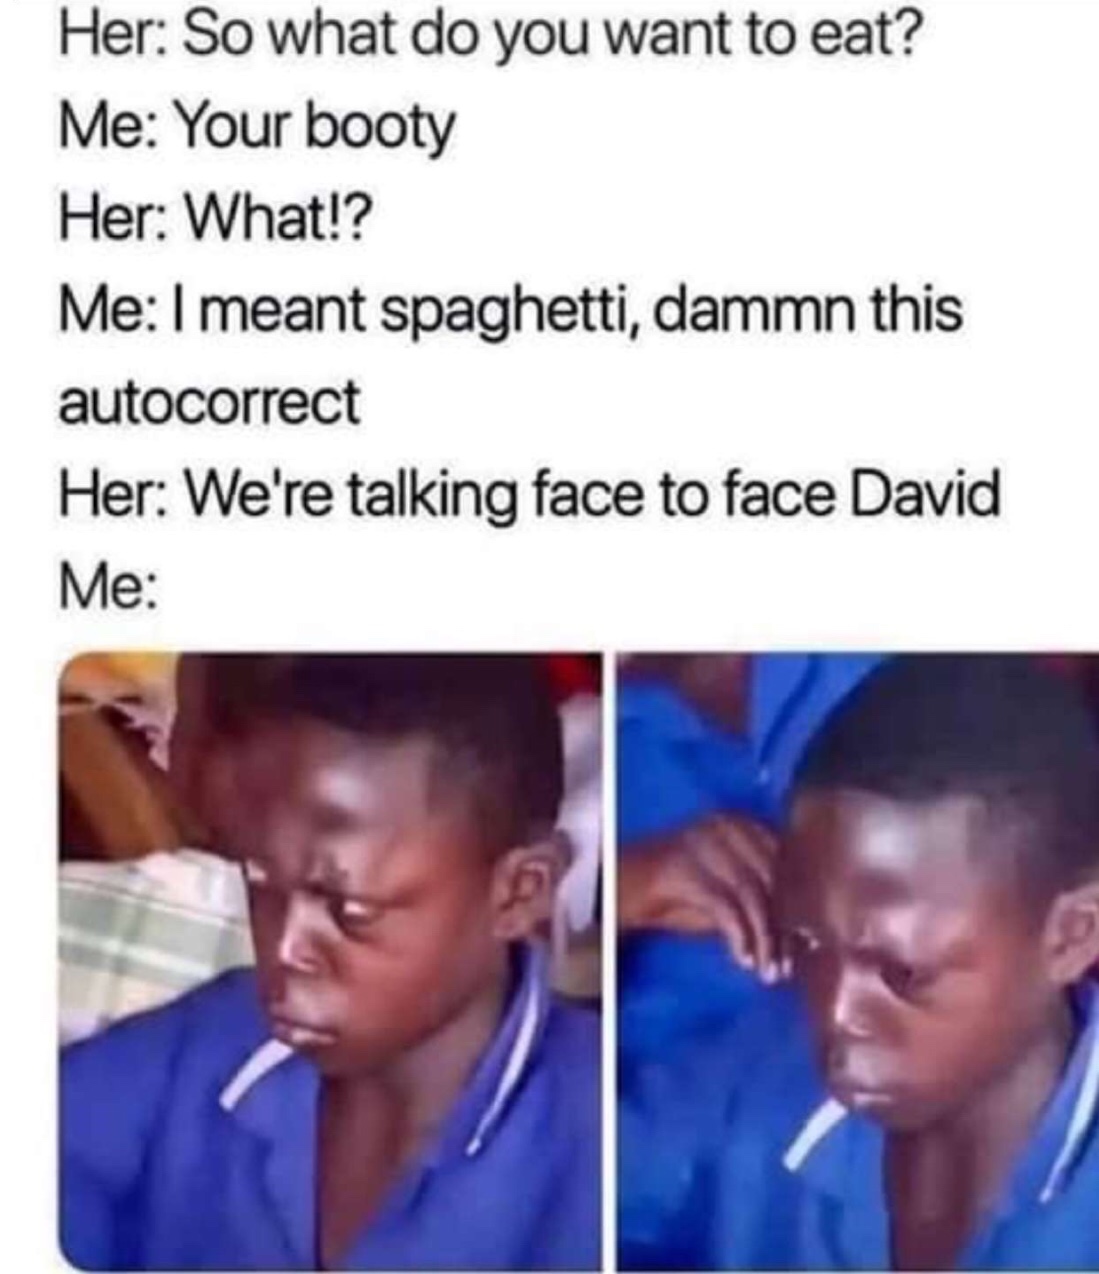 Meme - Her So what do you want to eat? Me Your booty Her What!? Me I meant spaghetti, dammn this autocorrect Her We're talking face to face David Me